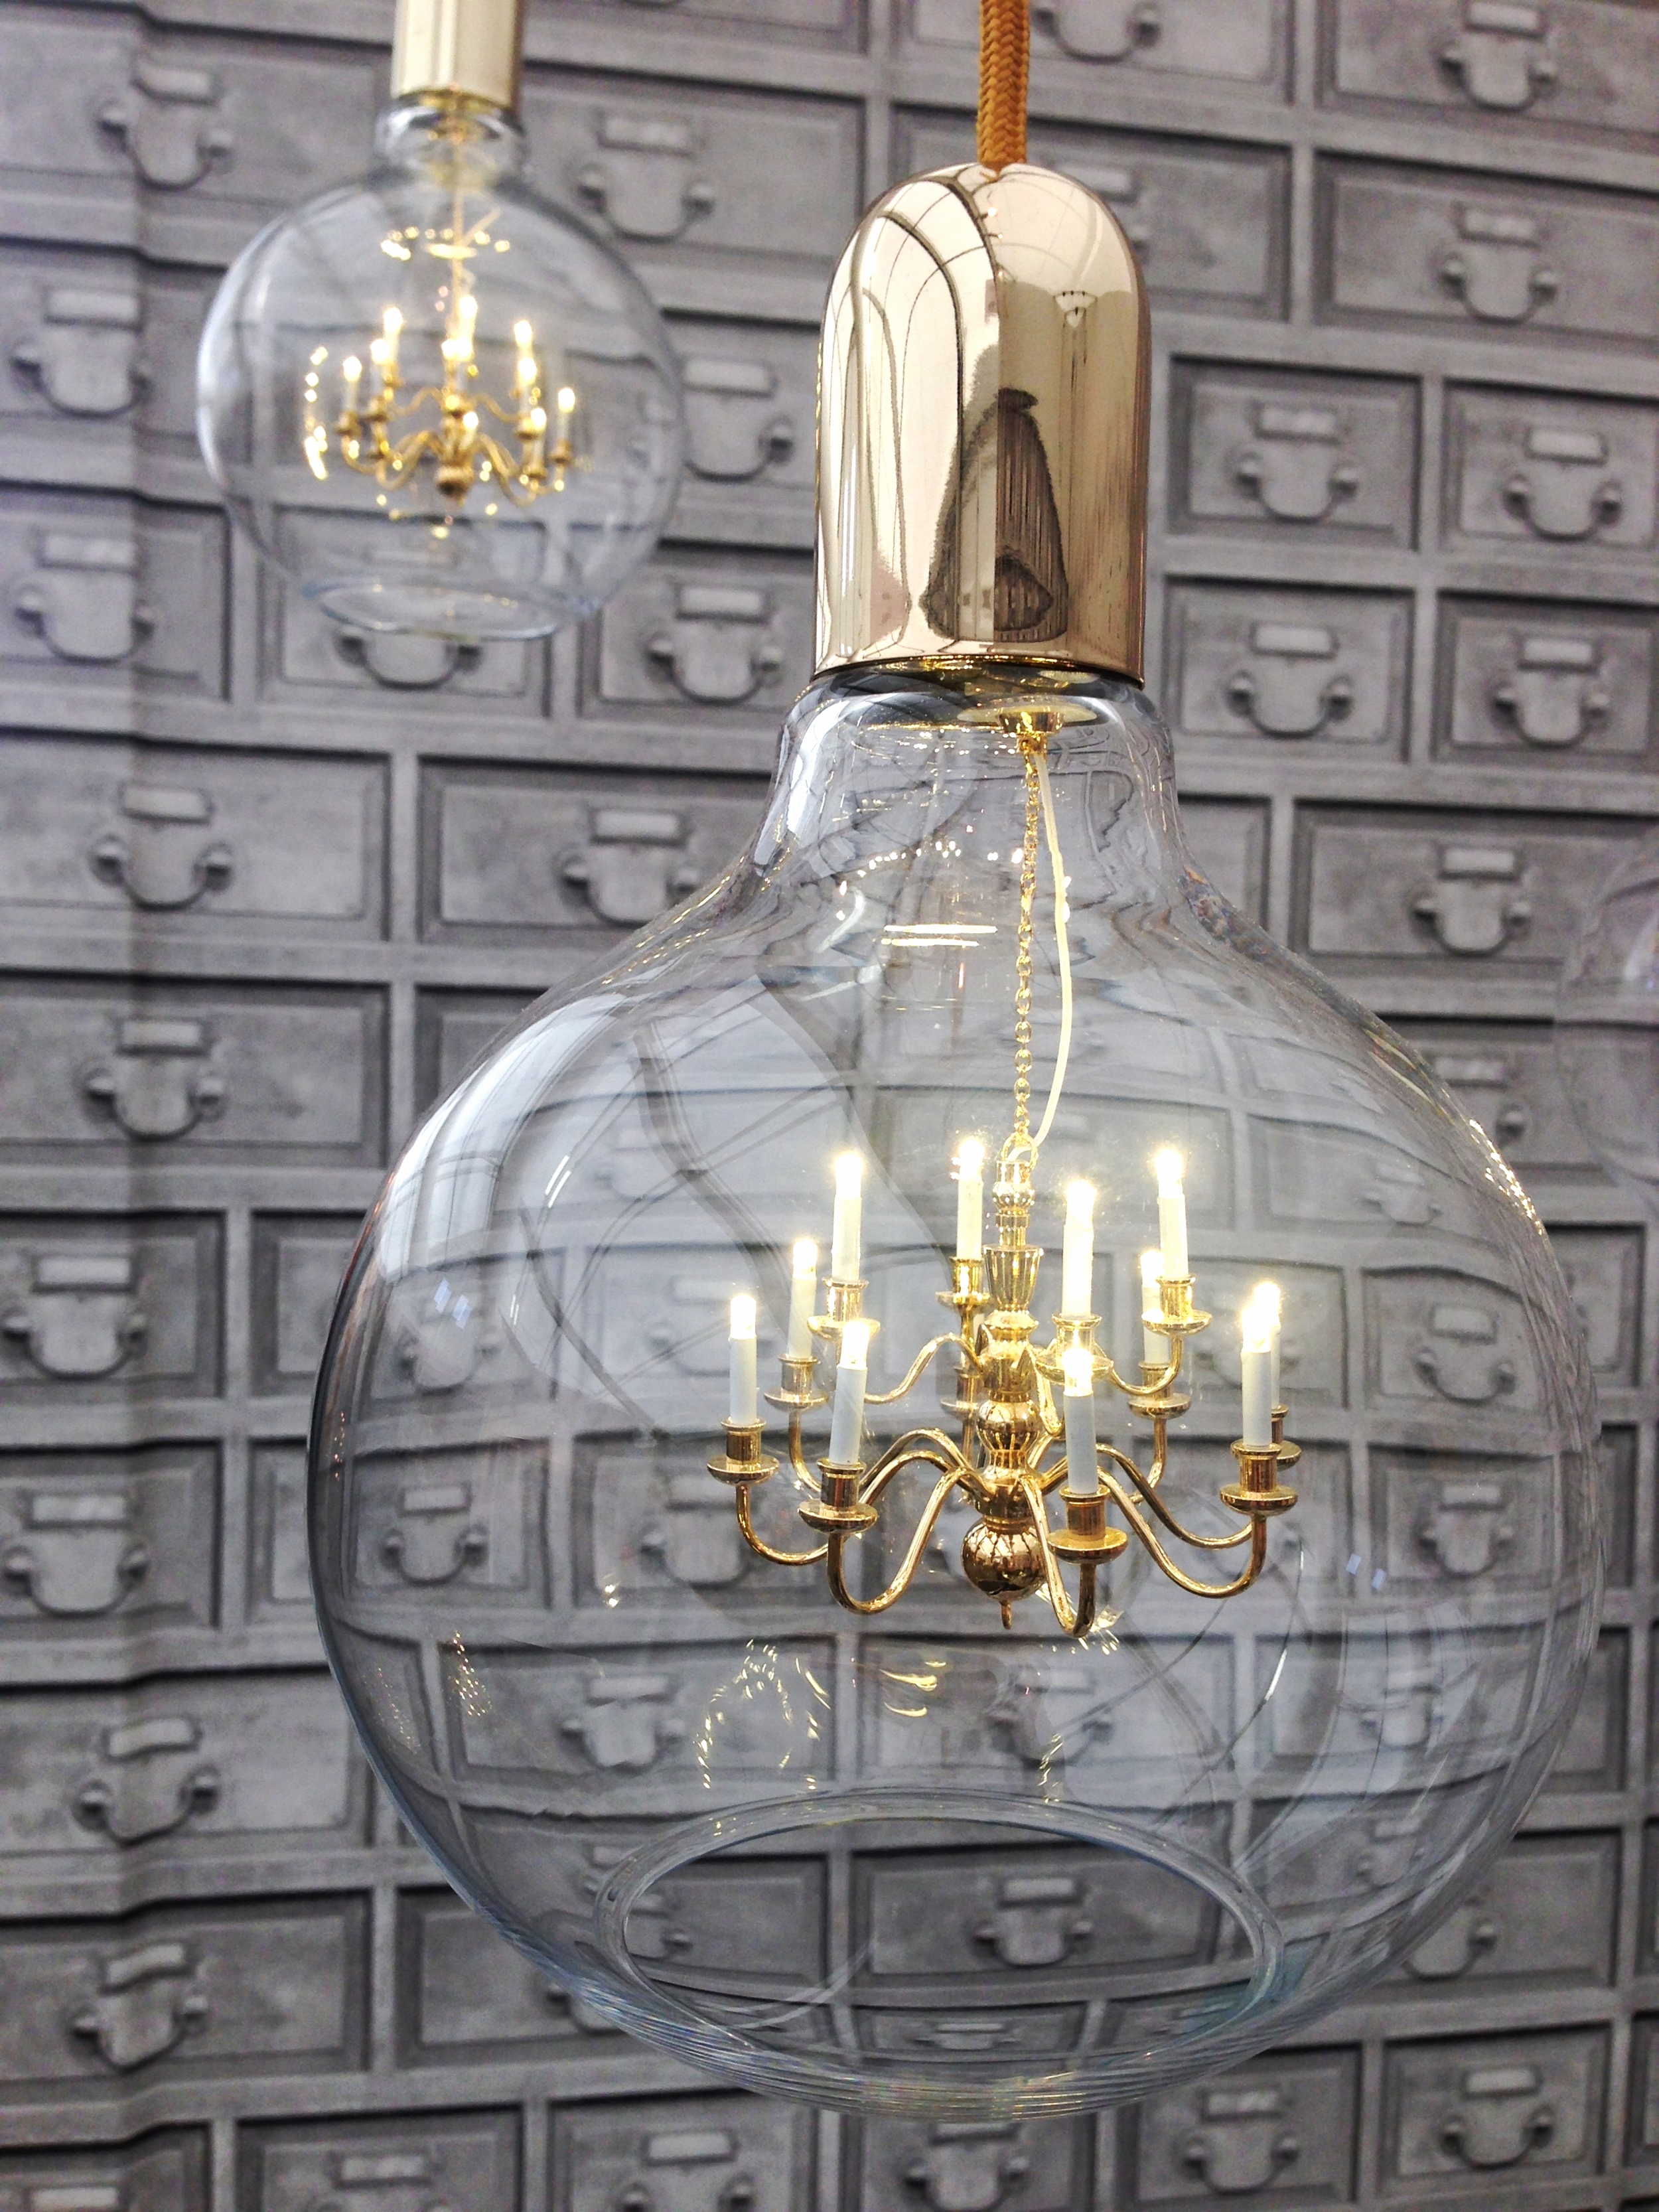   Mineheart  eclectic light with tiny chandelier inside 